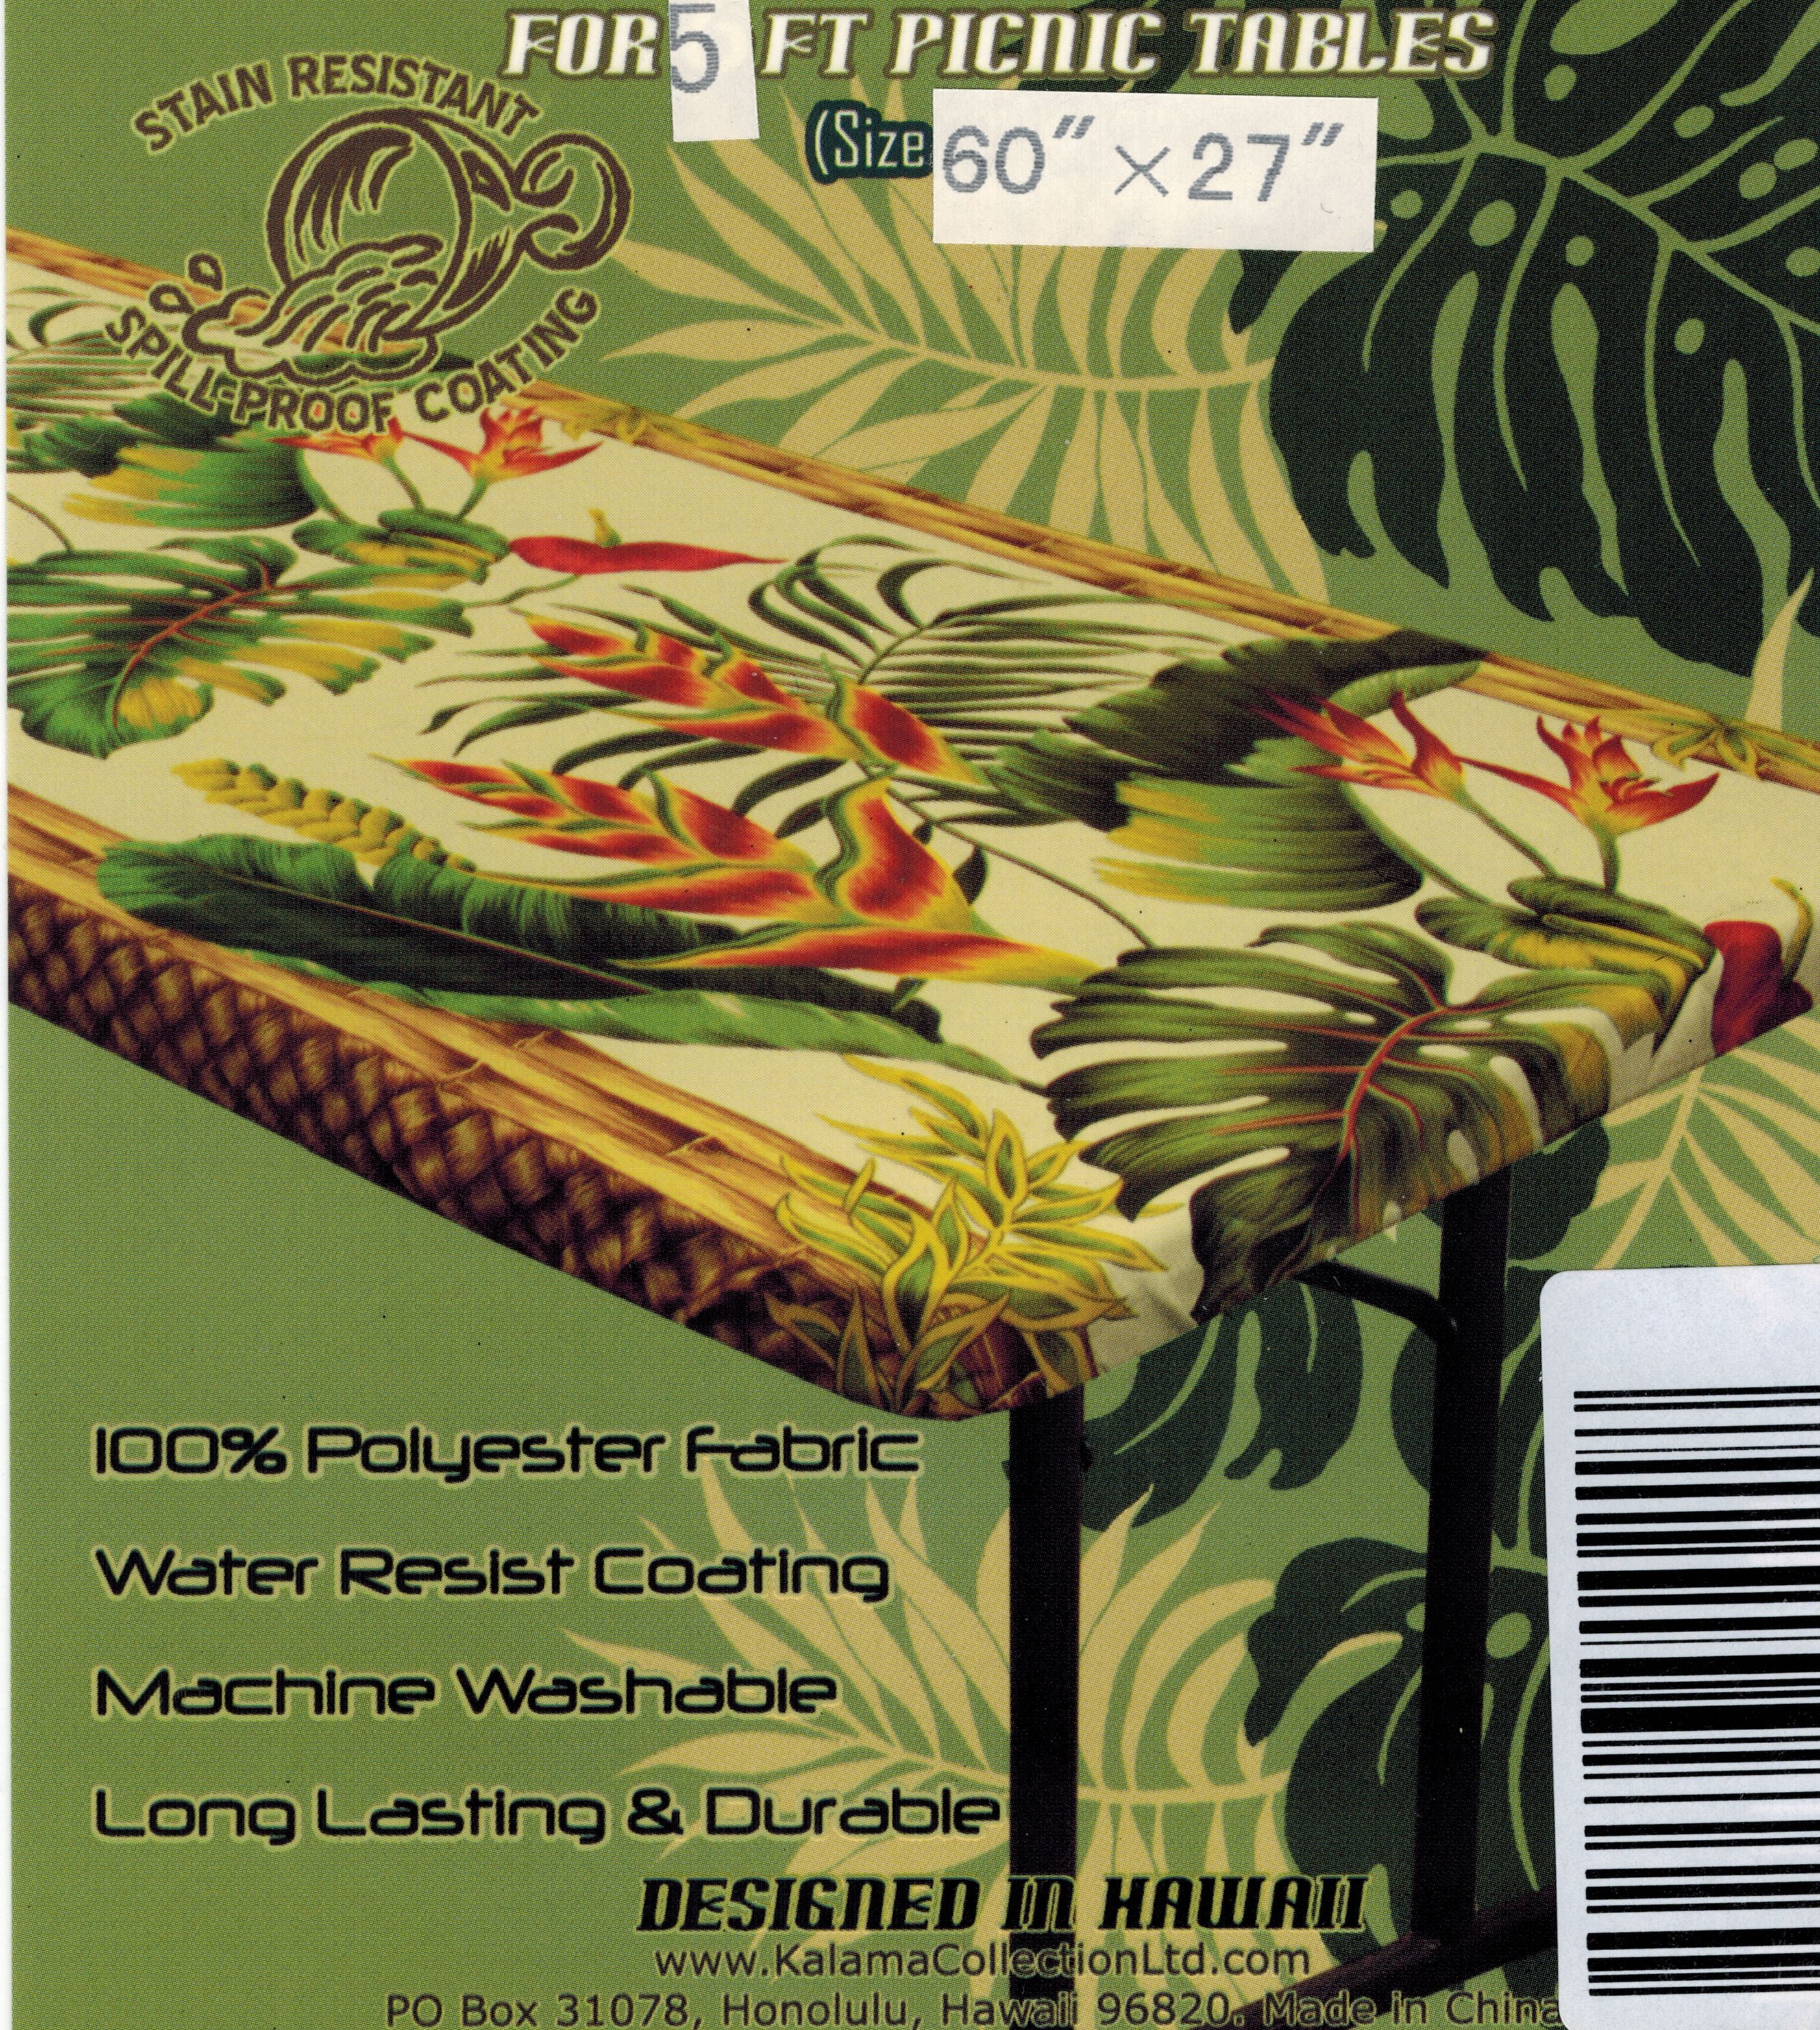 Hawaiian Tropical Flower fitted Tablecloth cover (Fits 5 feet picnic tables  60x27